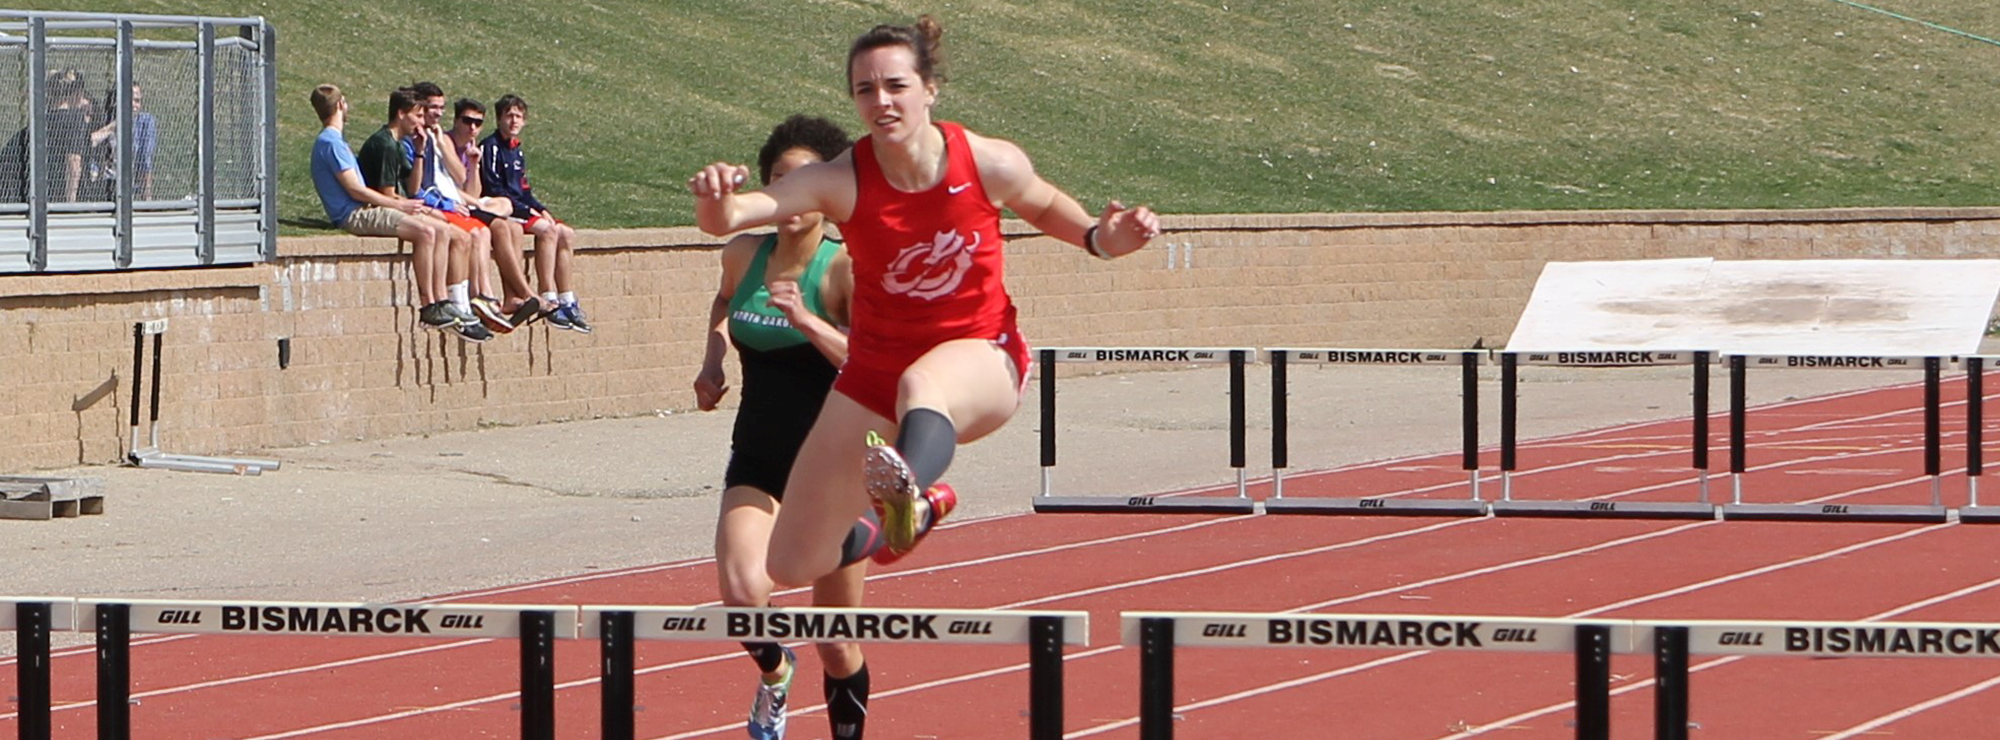 Hurdlers compete in the Distr